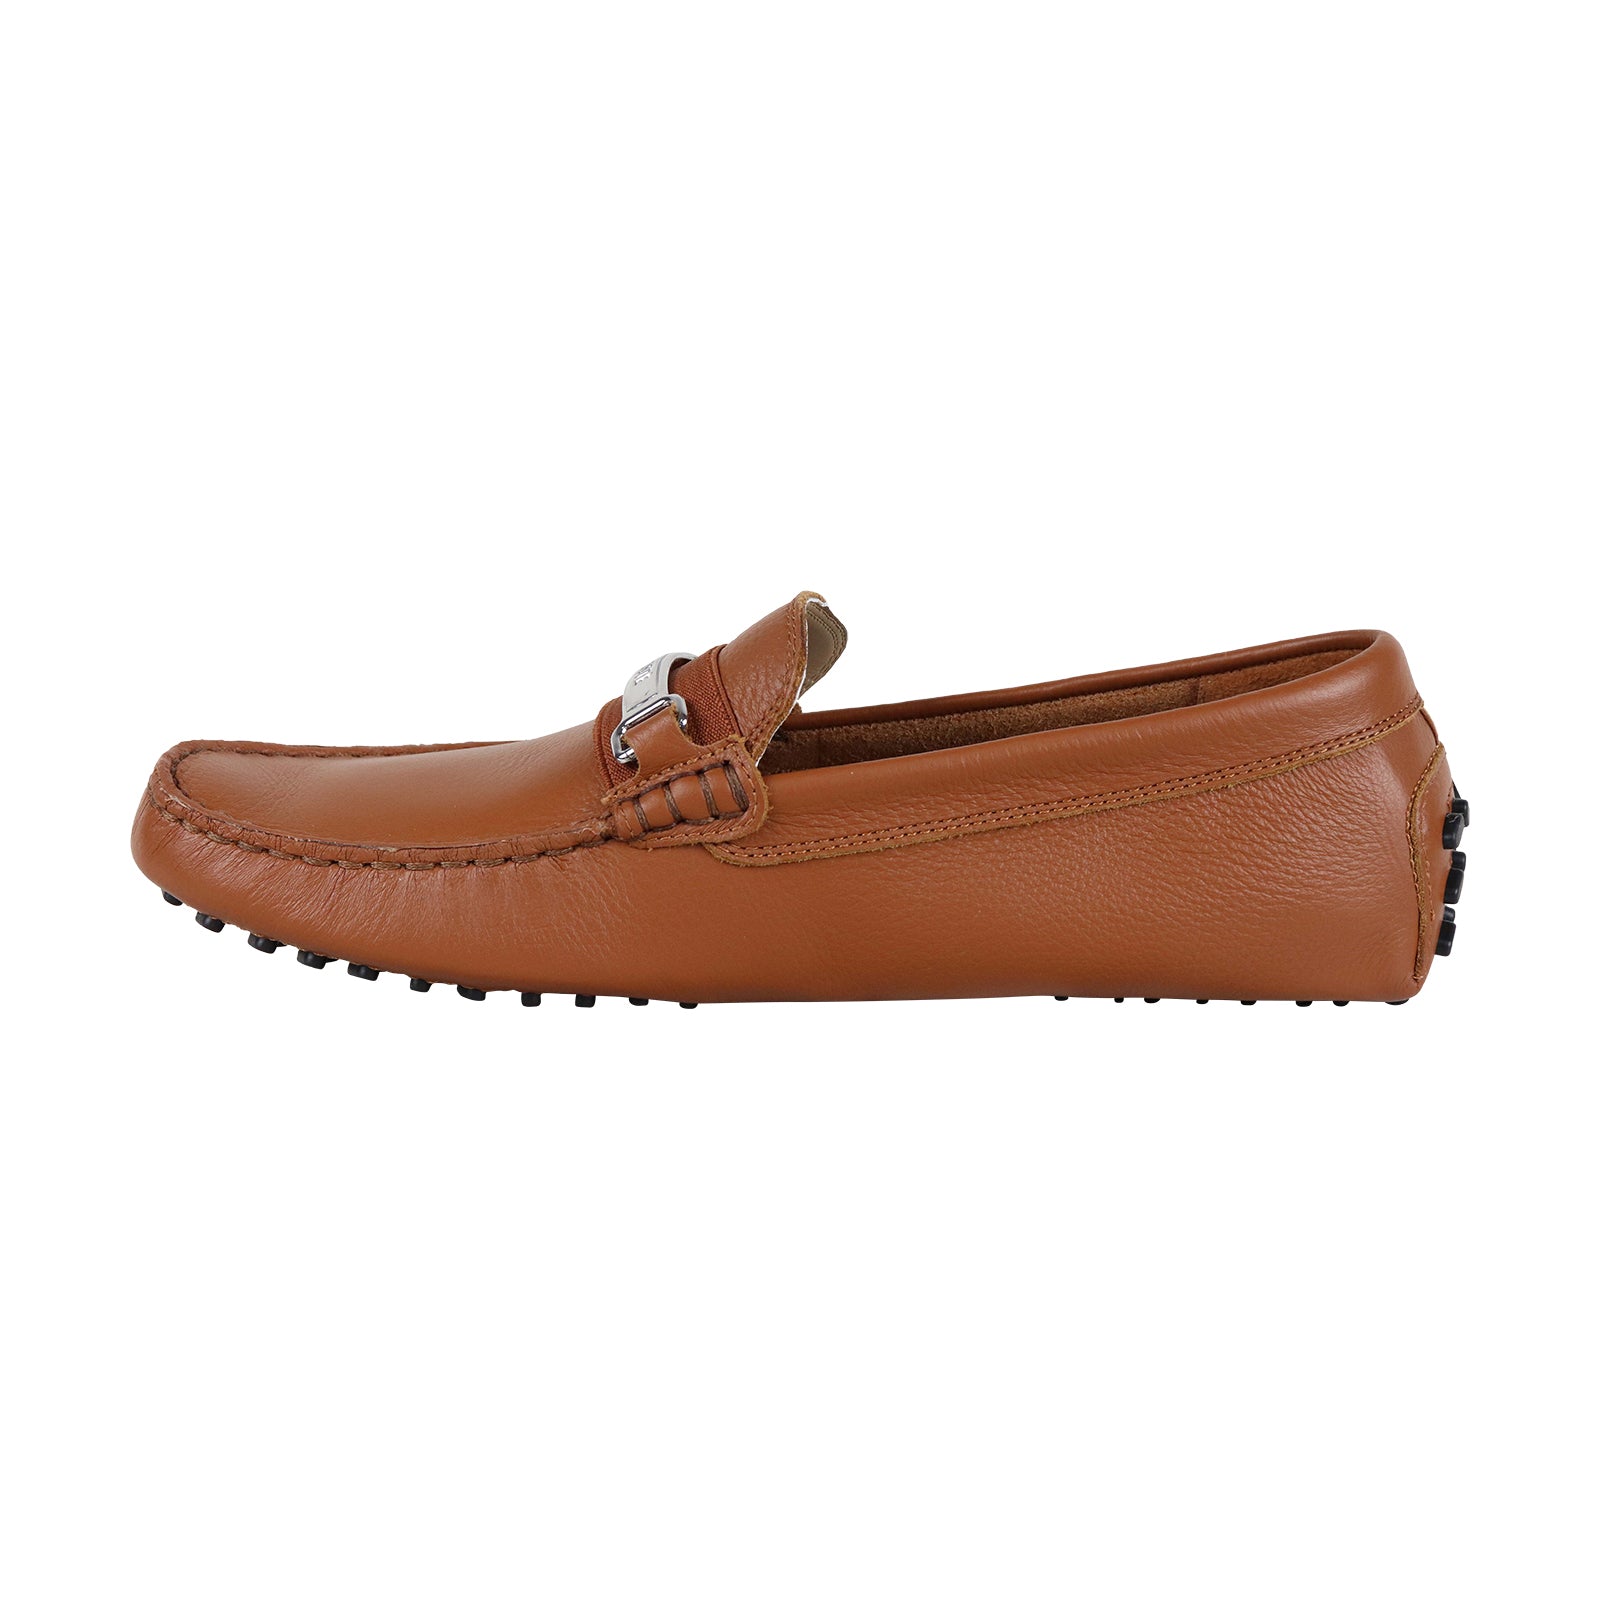 Lacoste Ansted 318 1 U Mens Tan Brown Leather Slip On Moccasin Loafers ...